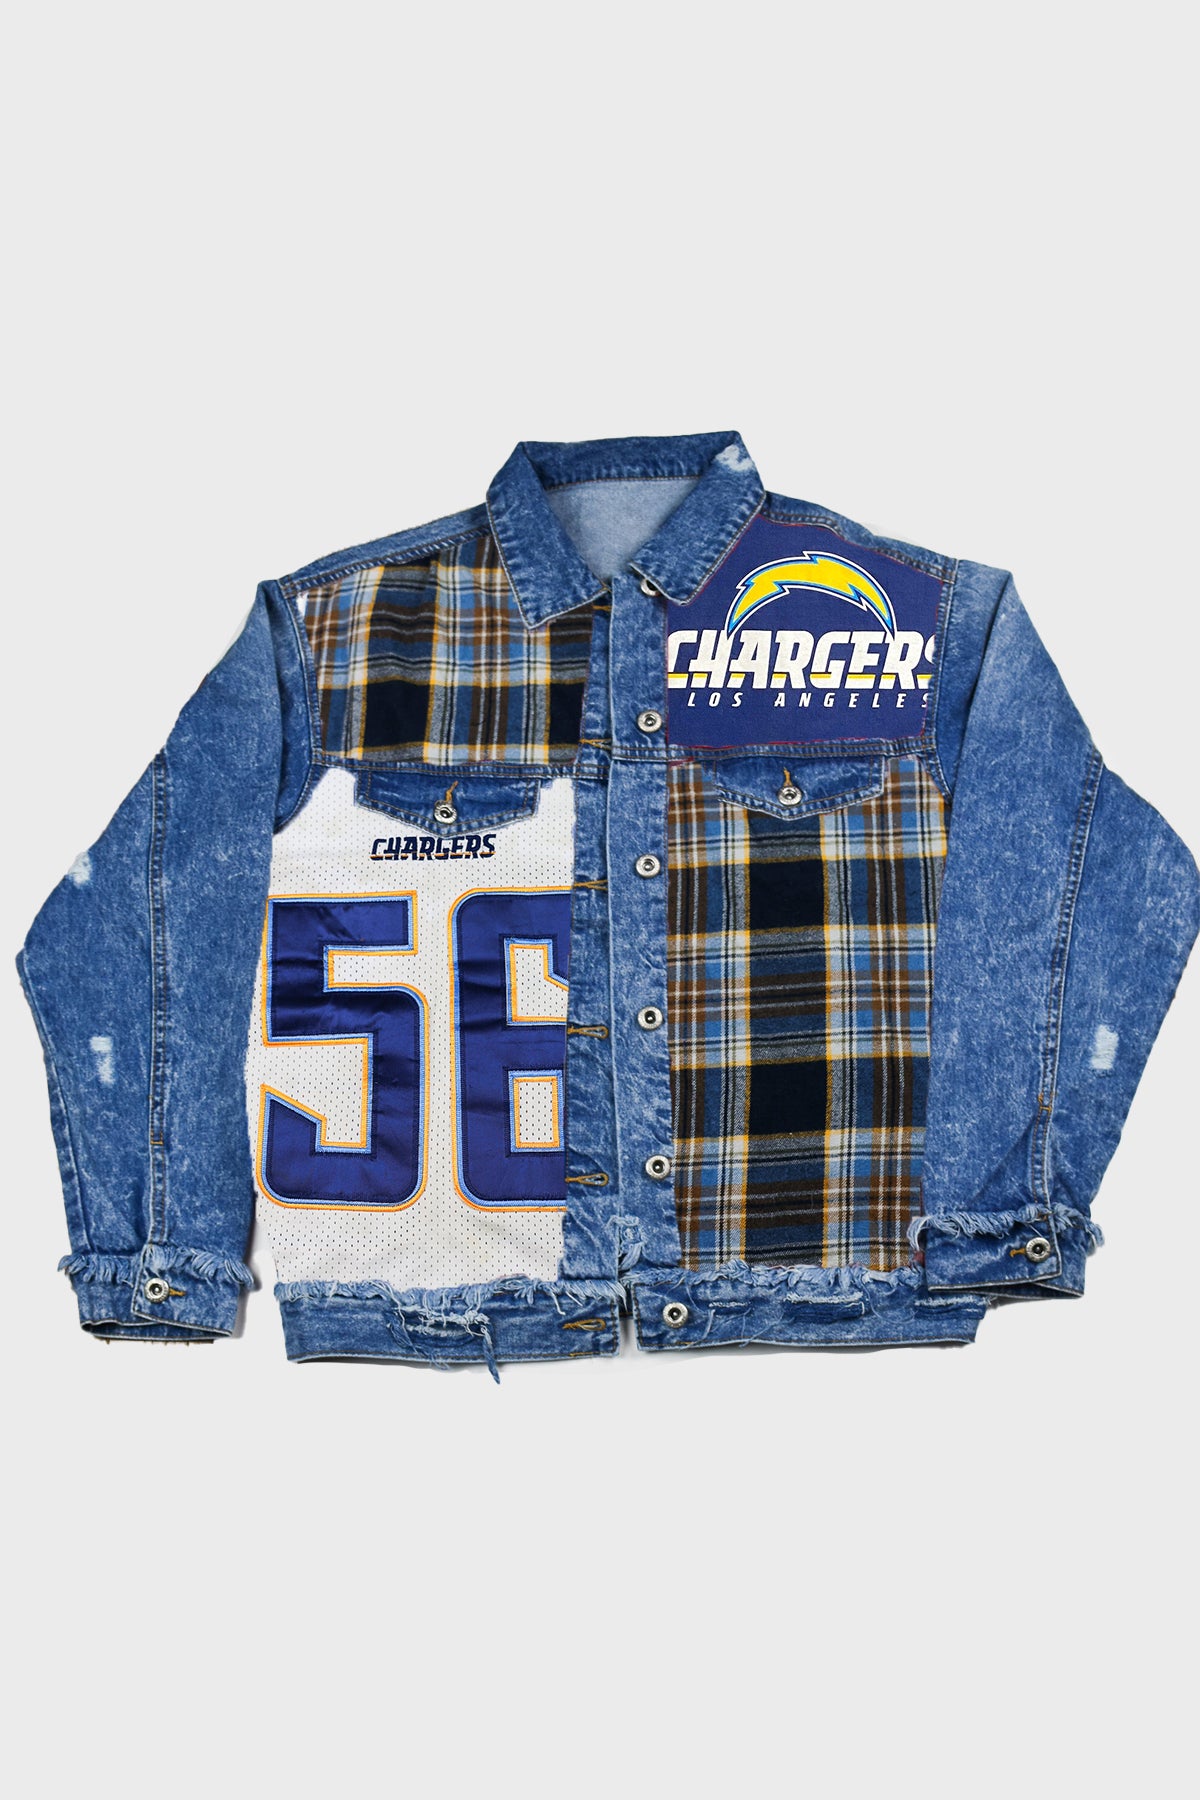 Upcycled Chargers Patchwork Jacket